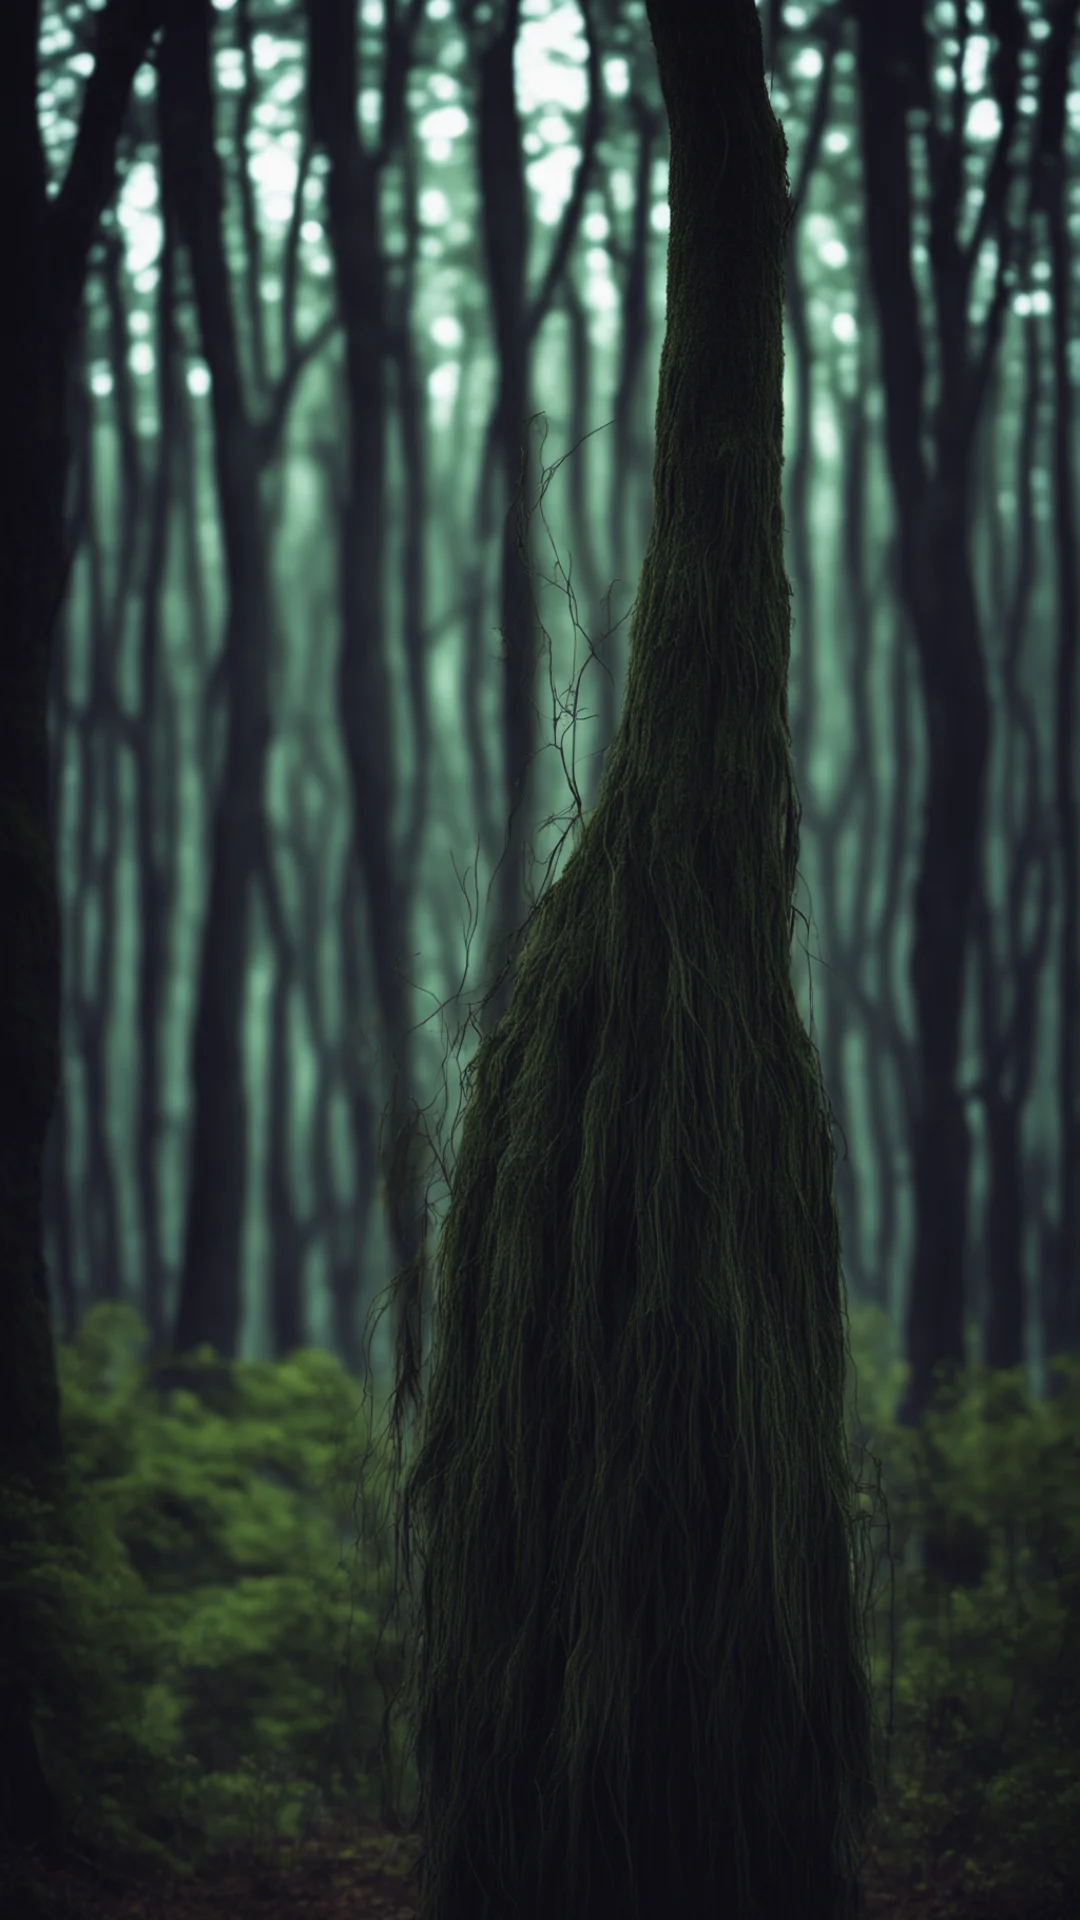 aidark forest night magical eyes looking back willow the wisp volume light depth of field ar 169 tall